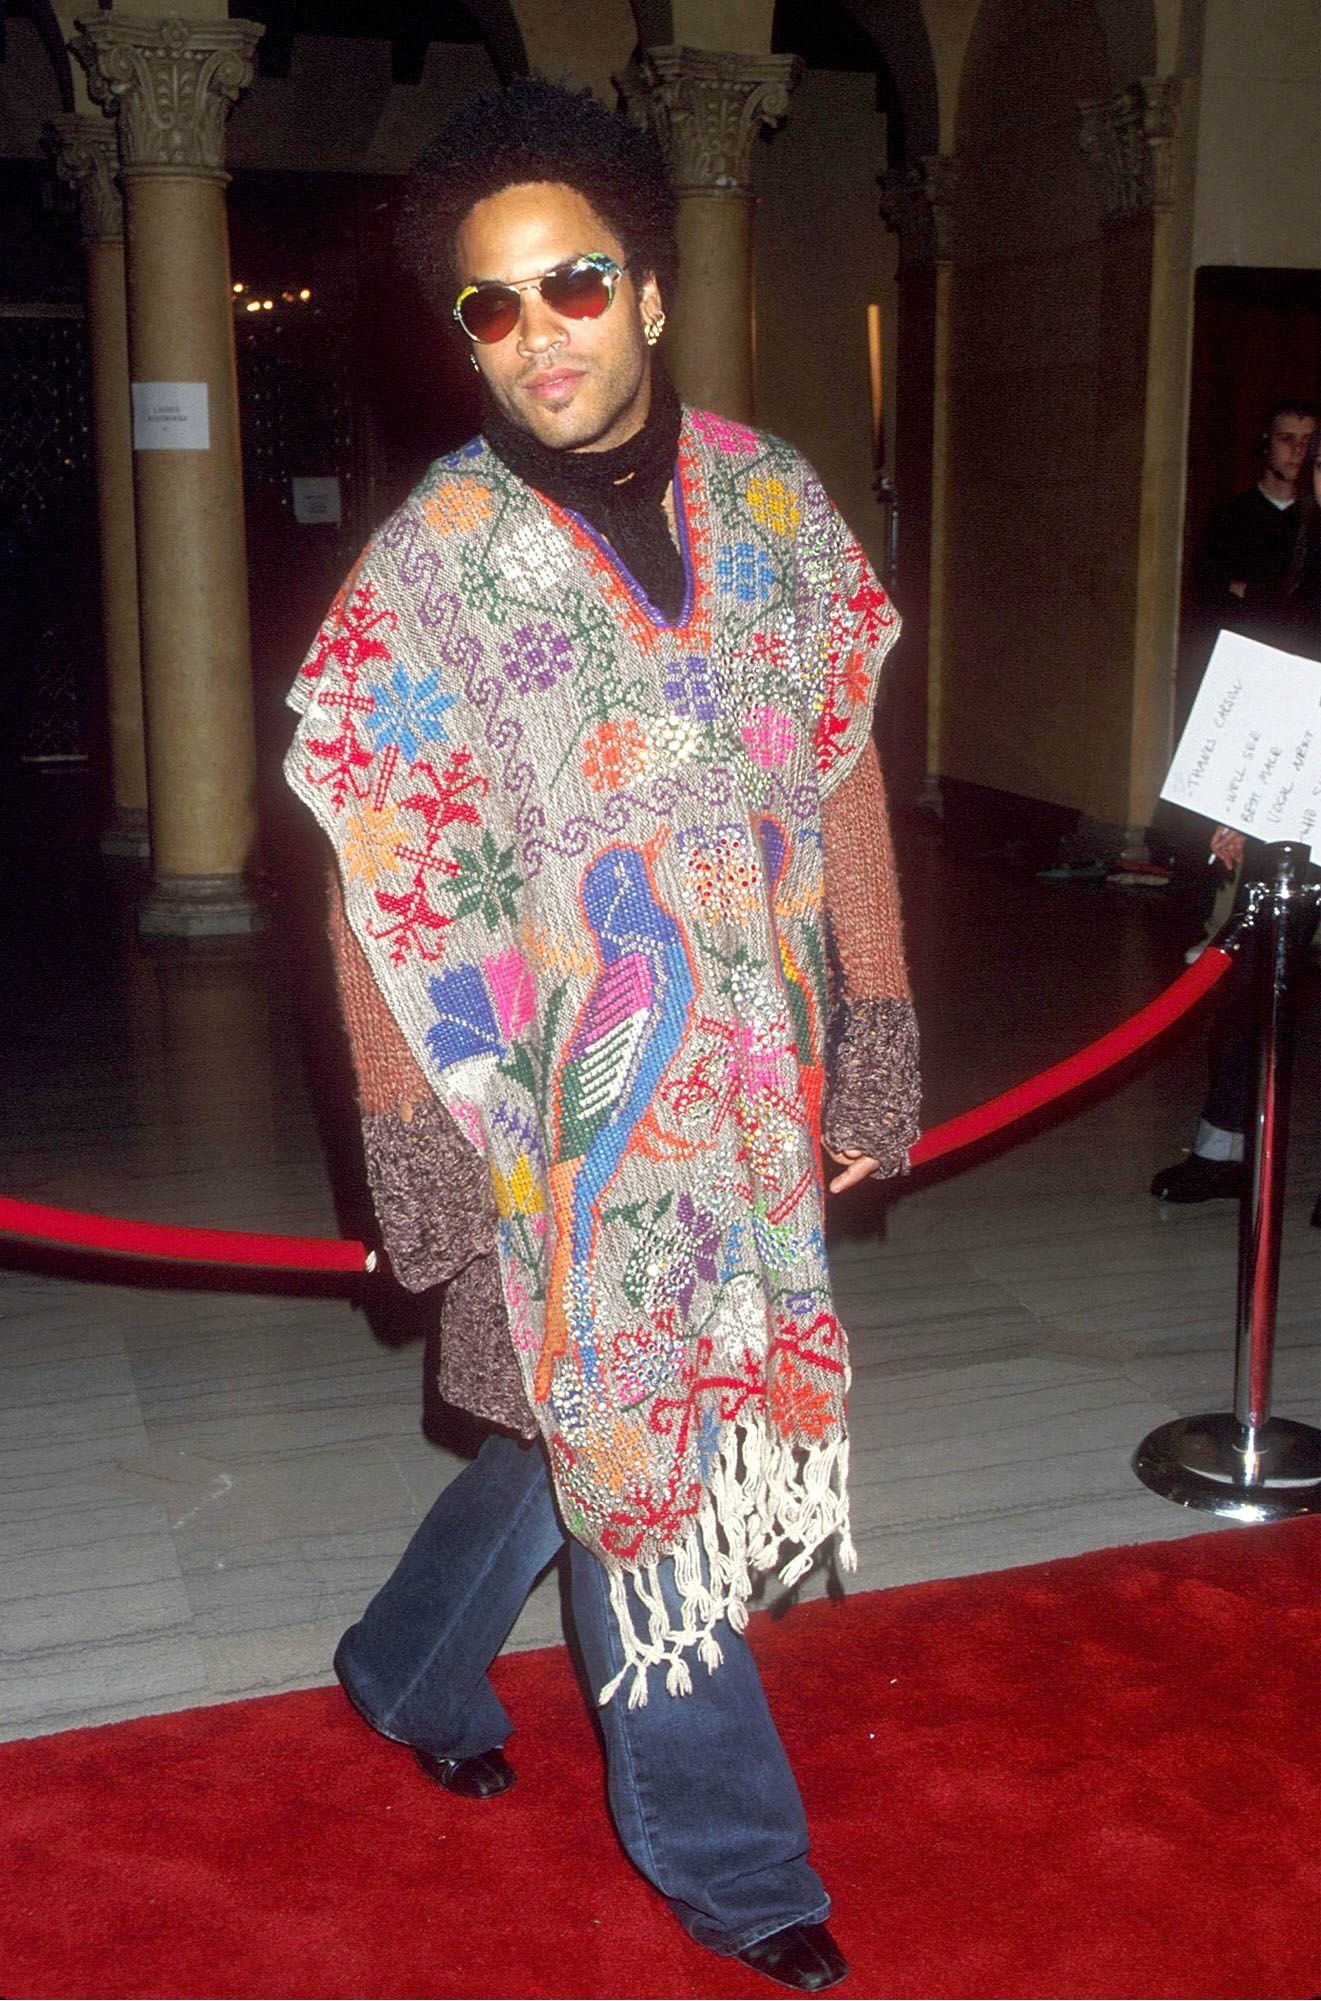 That time he showed up for a Grammy nominees photo shoot wearing this colorful knitted poncho.